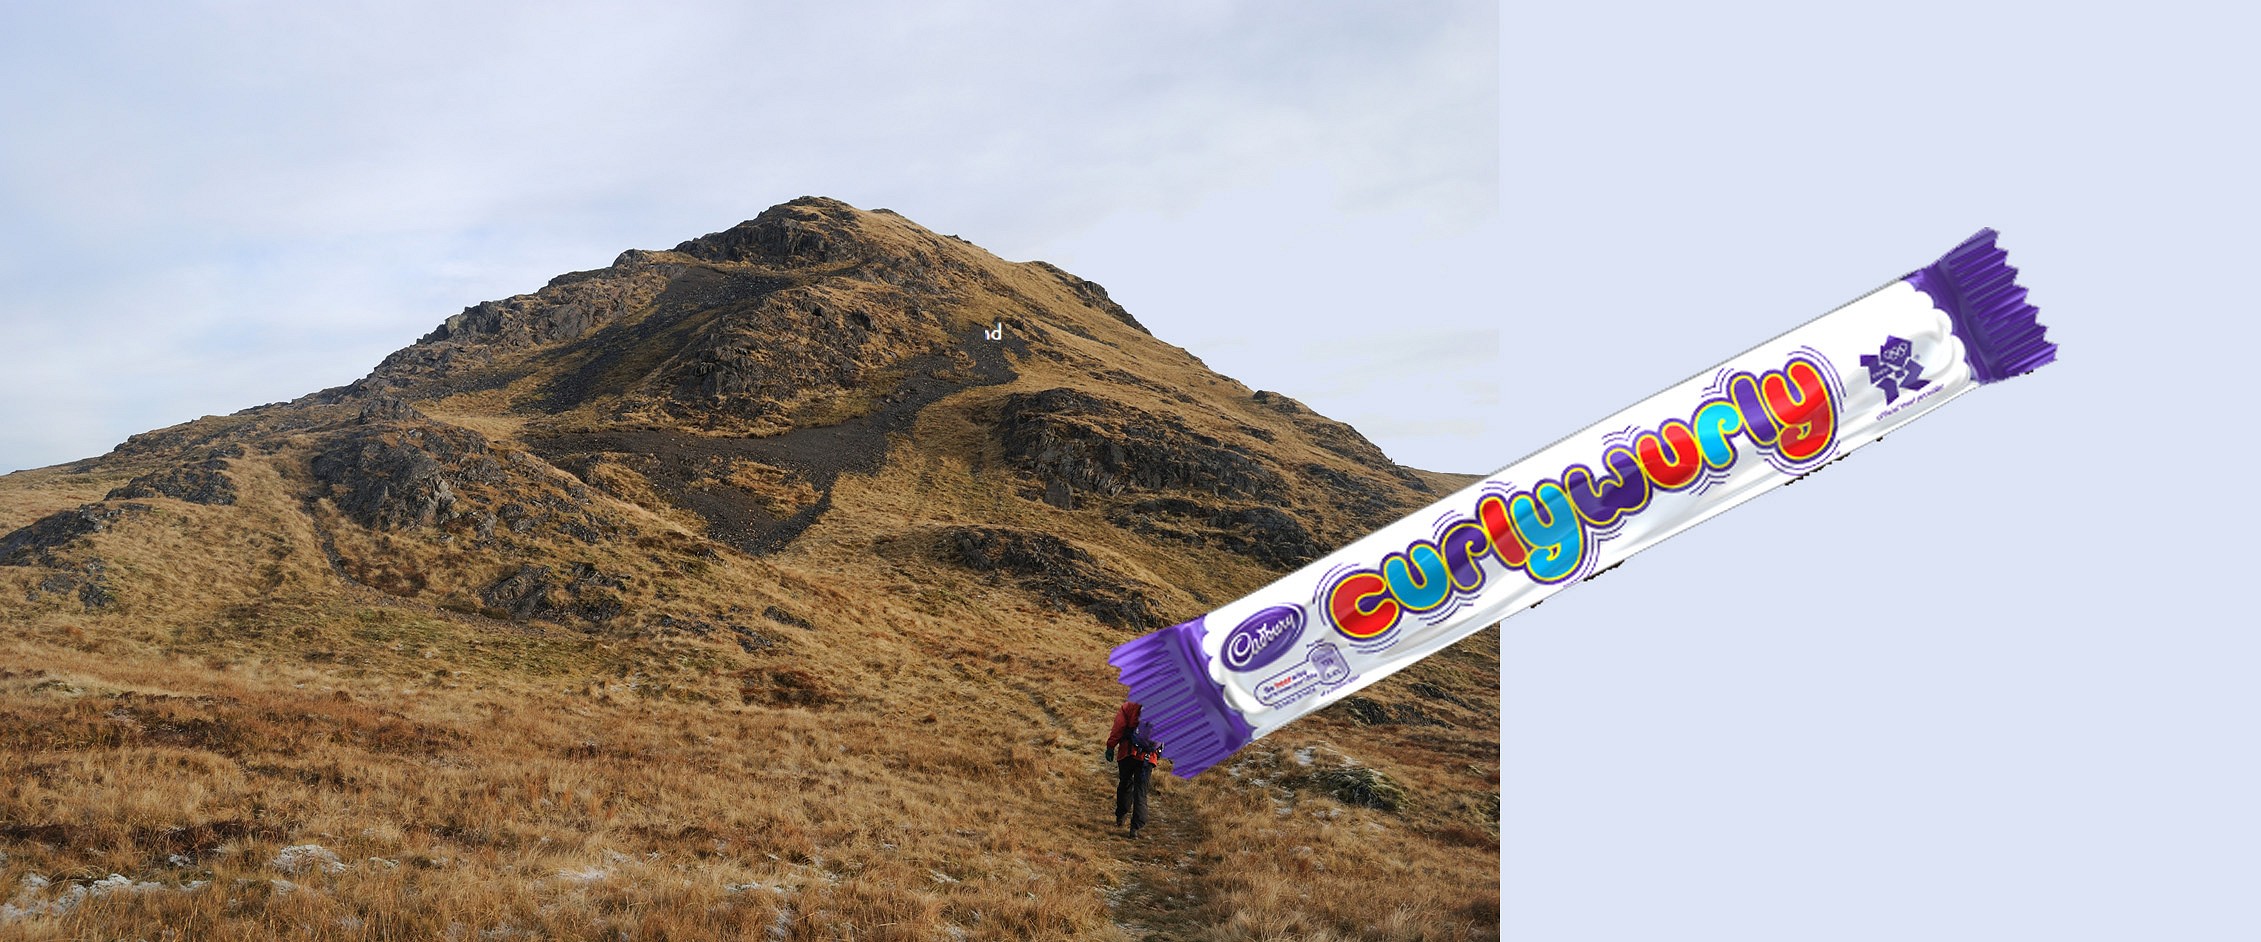 Curleywee (left) and Cadbury's Curly Wurly: a chewy snack to be enjoyed as part of a healthy, active lifestyle  © Ronald Turnbull